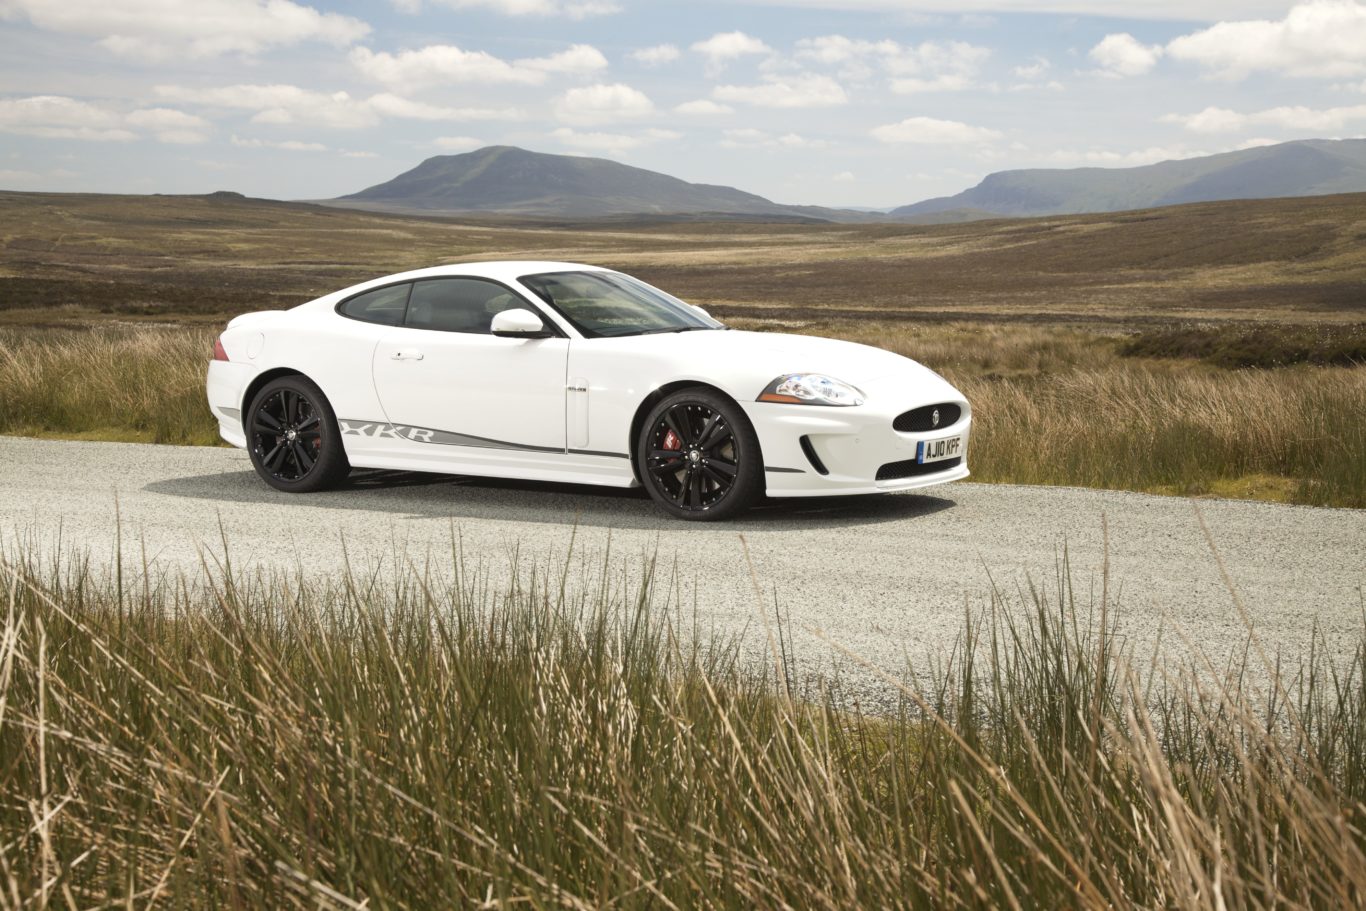 A supercharged V8 engine gives the XKR huge performance 